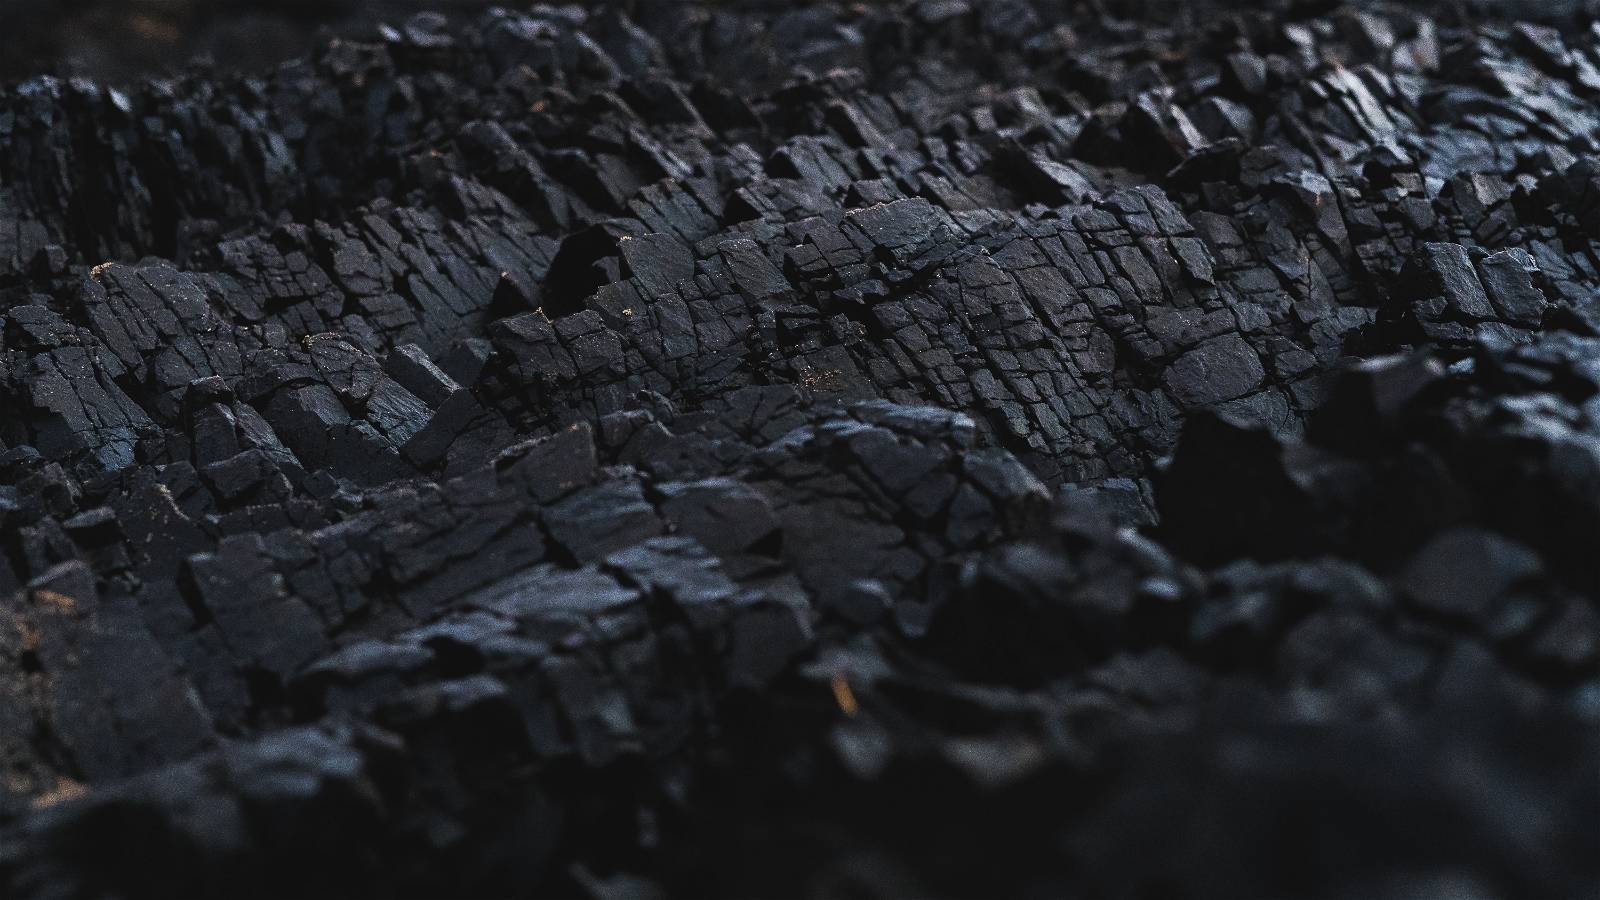 Examining the pros and cons of coal as an energy source